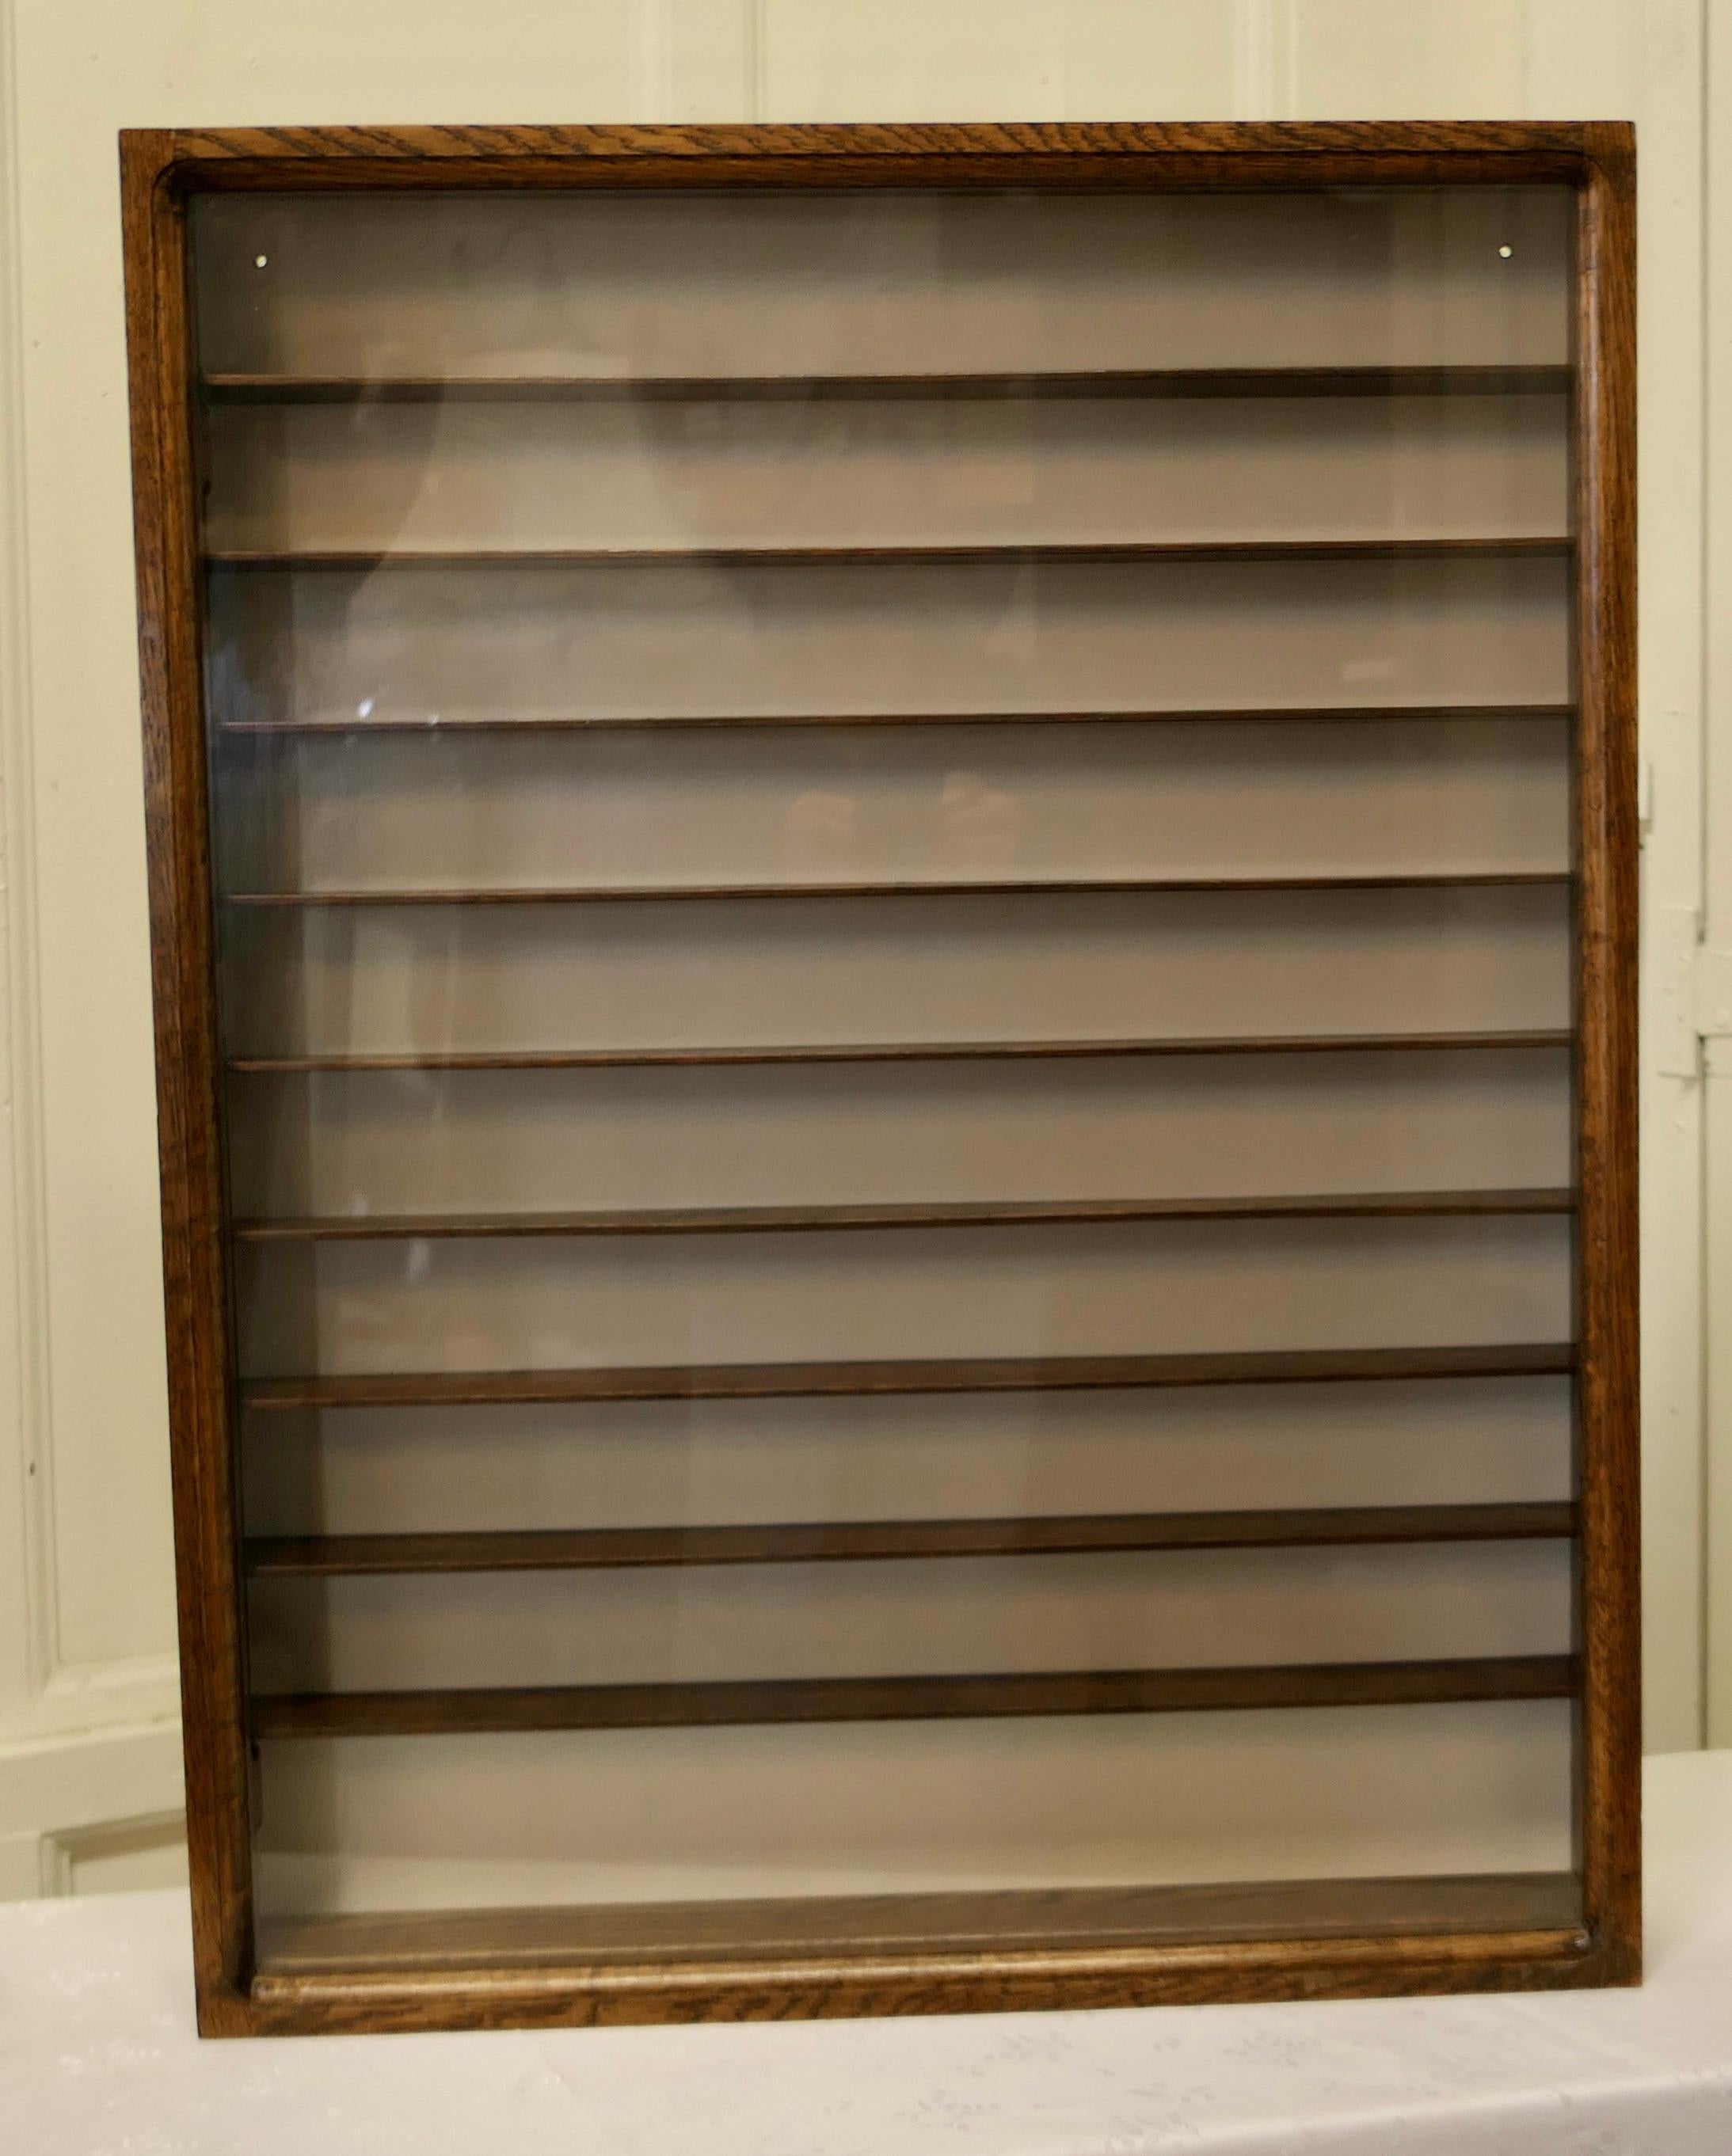 Arts & Crafts/ table top wall hanging collectors display cabinet.

This is quite a shallow wall hanging cupboard, the inside is 2.5” deep with shelves that are between 2.5” and 3.5” apart and it has a fully glazed door. 
The cabinet has an Oak